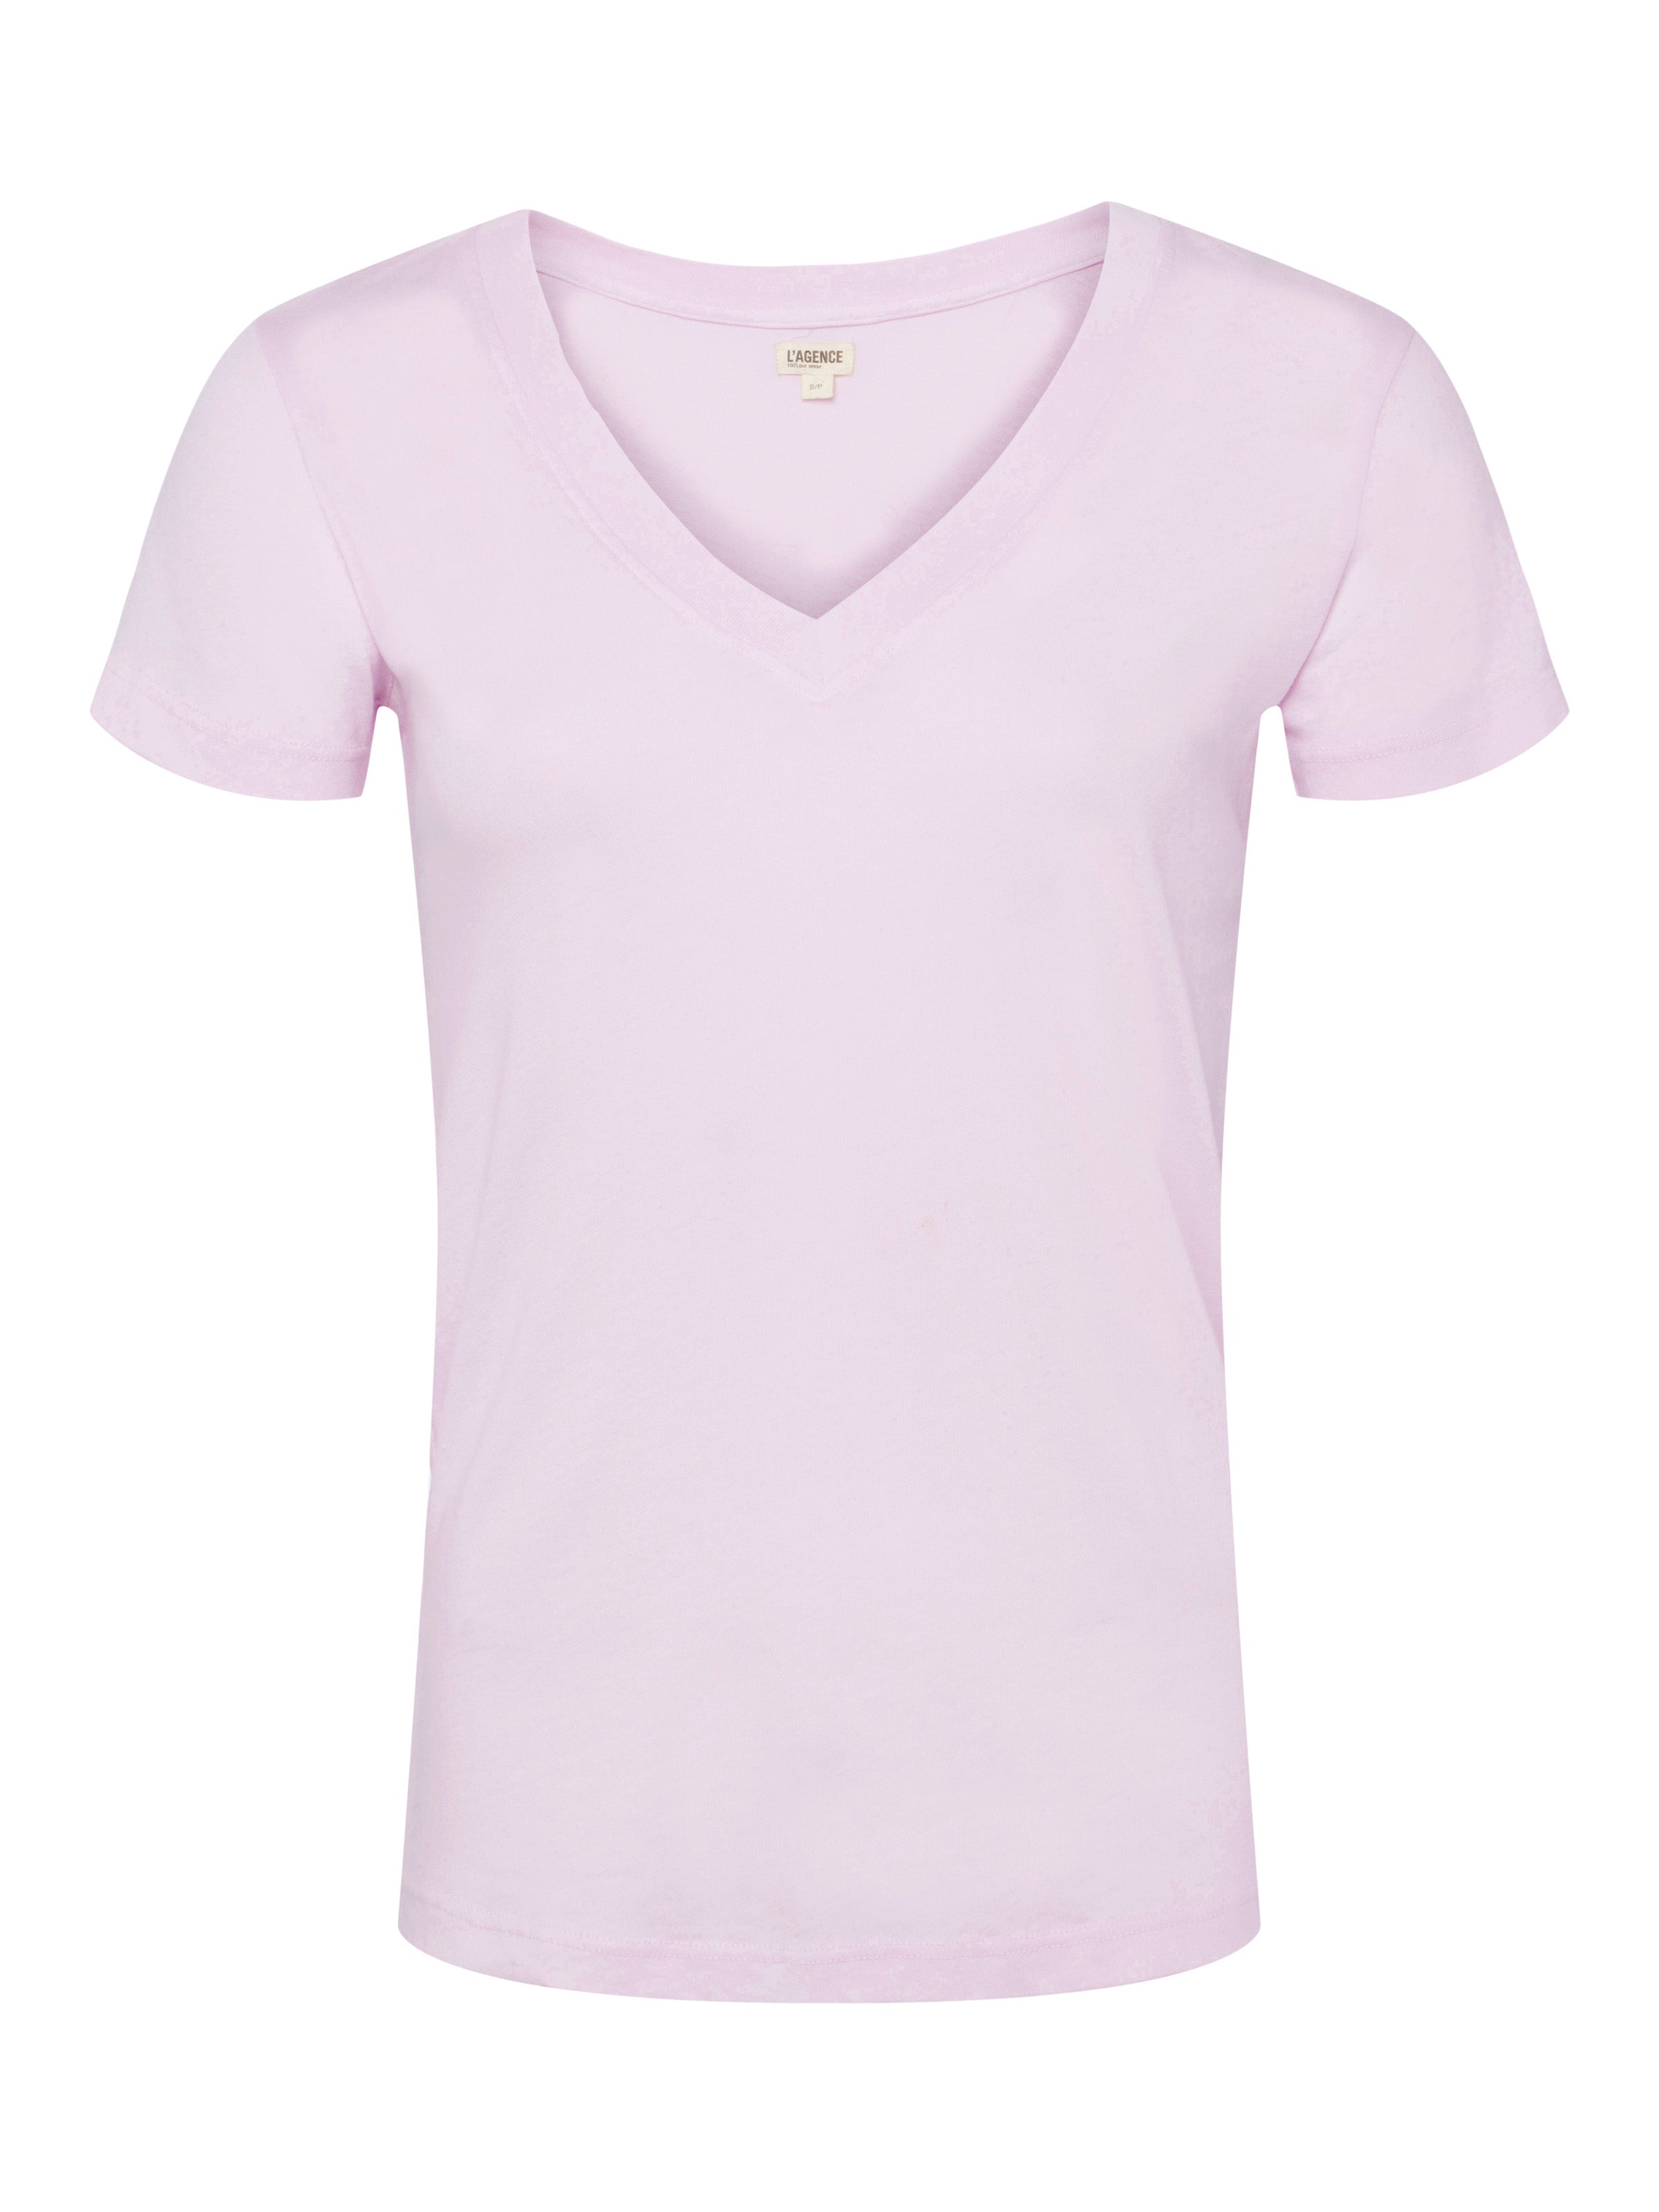 Becca V-Neck Tee in Lilac Snow